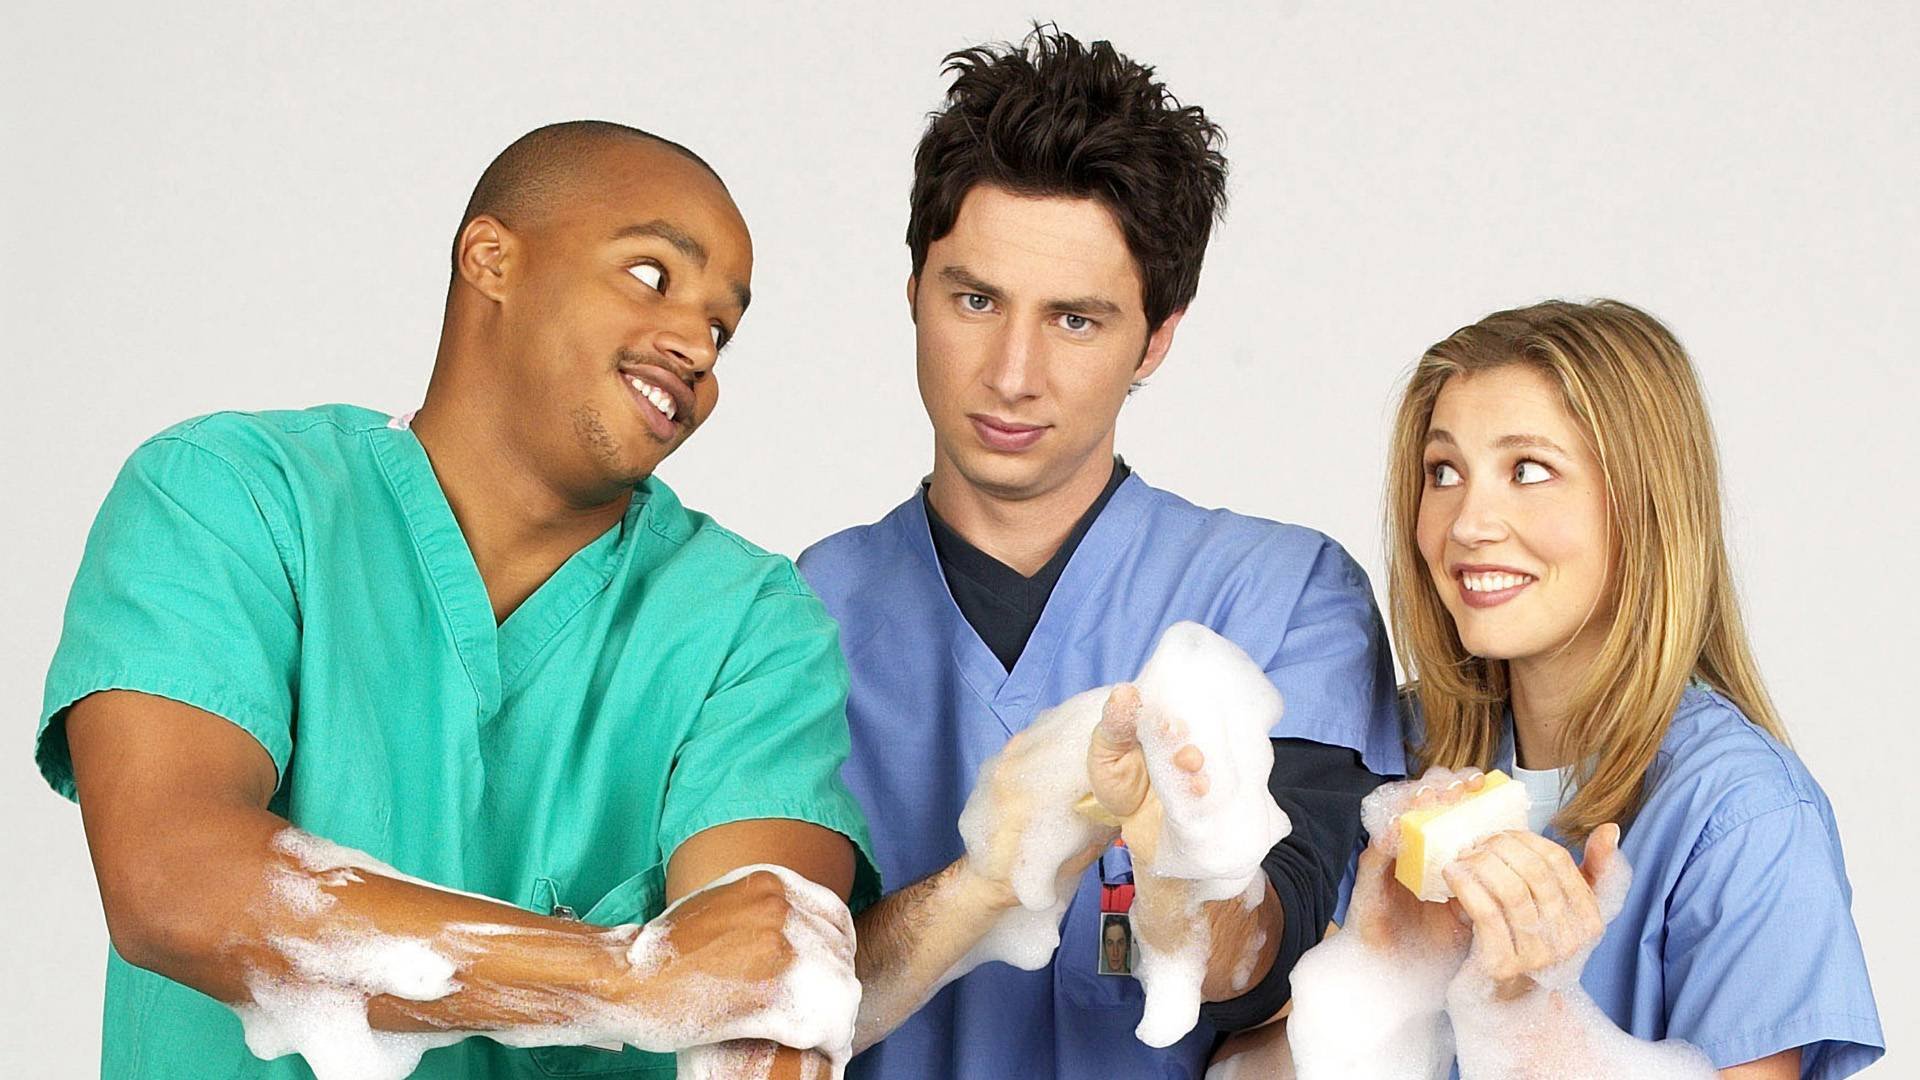 Scrubs Comedy Drama Series Medical 42 Wallpapers Hd Desktop And Mobile Backgrounds 